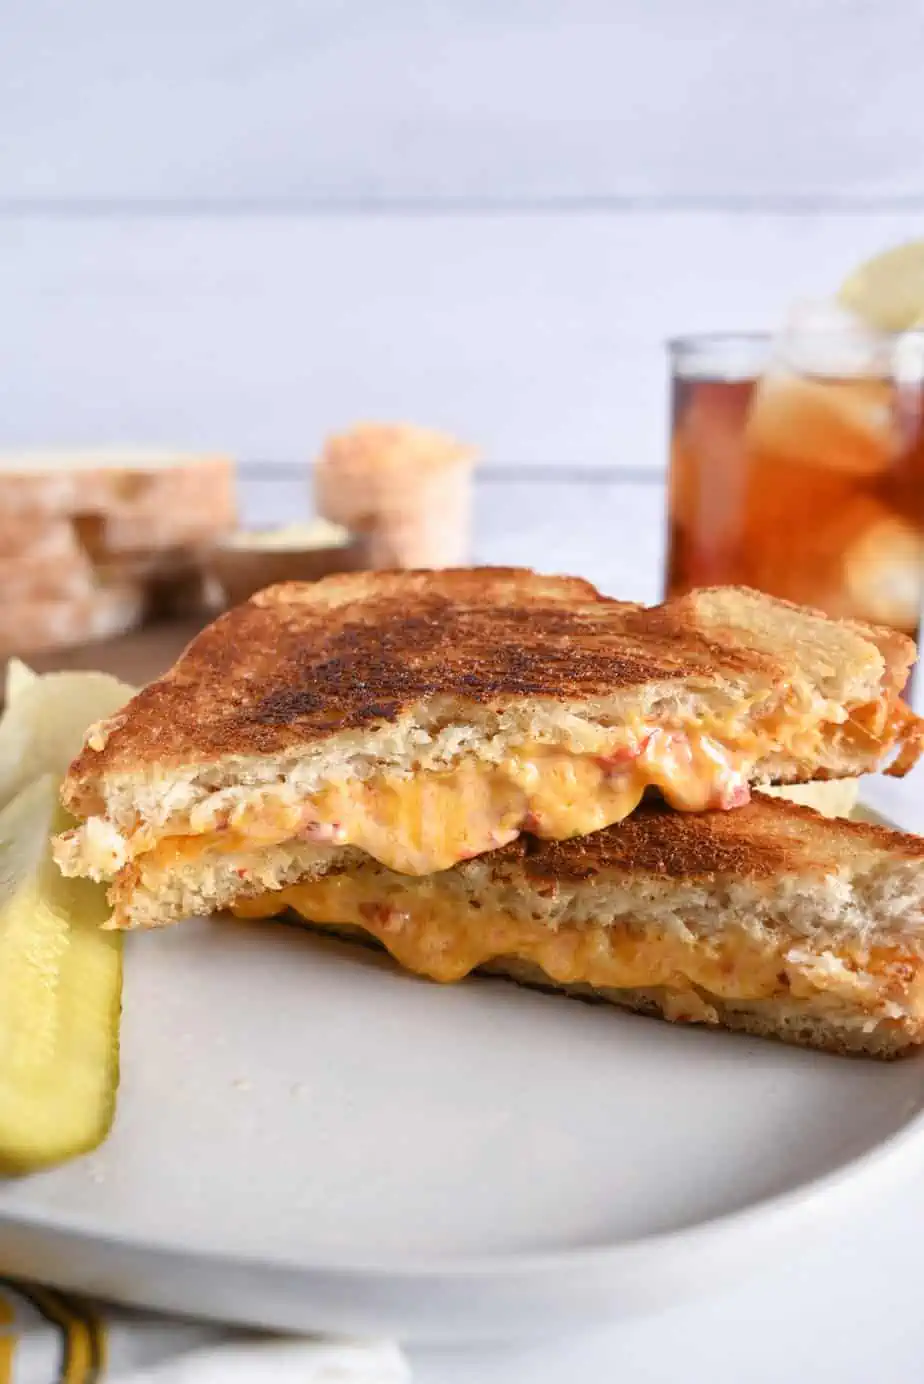 You're Doing It All Wrong - How to Make a Grilled Cheese Sandwich 